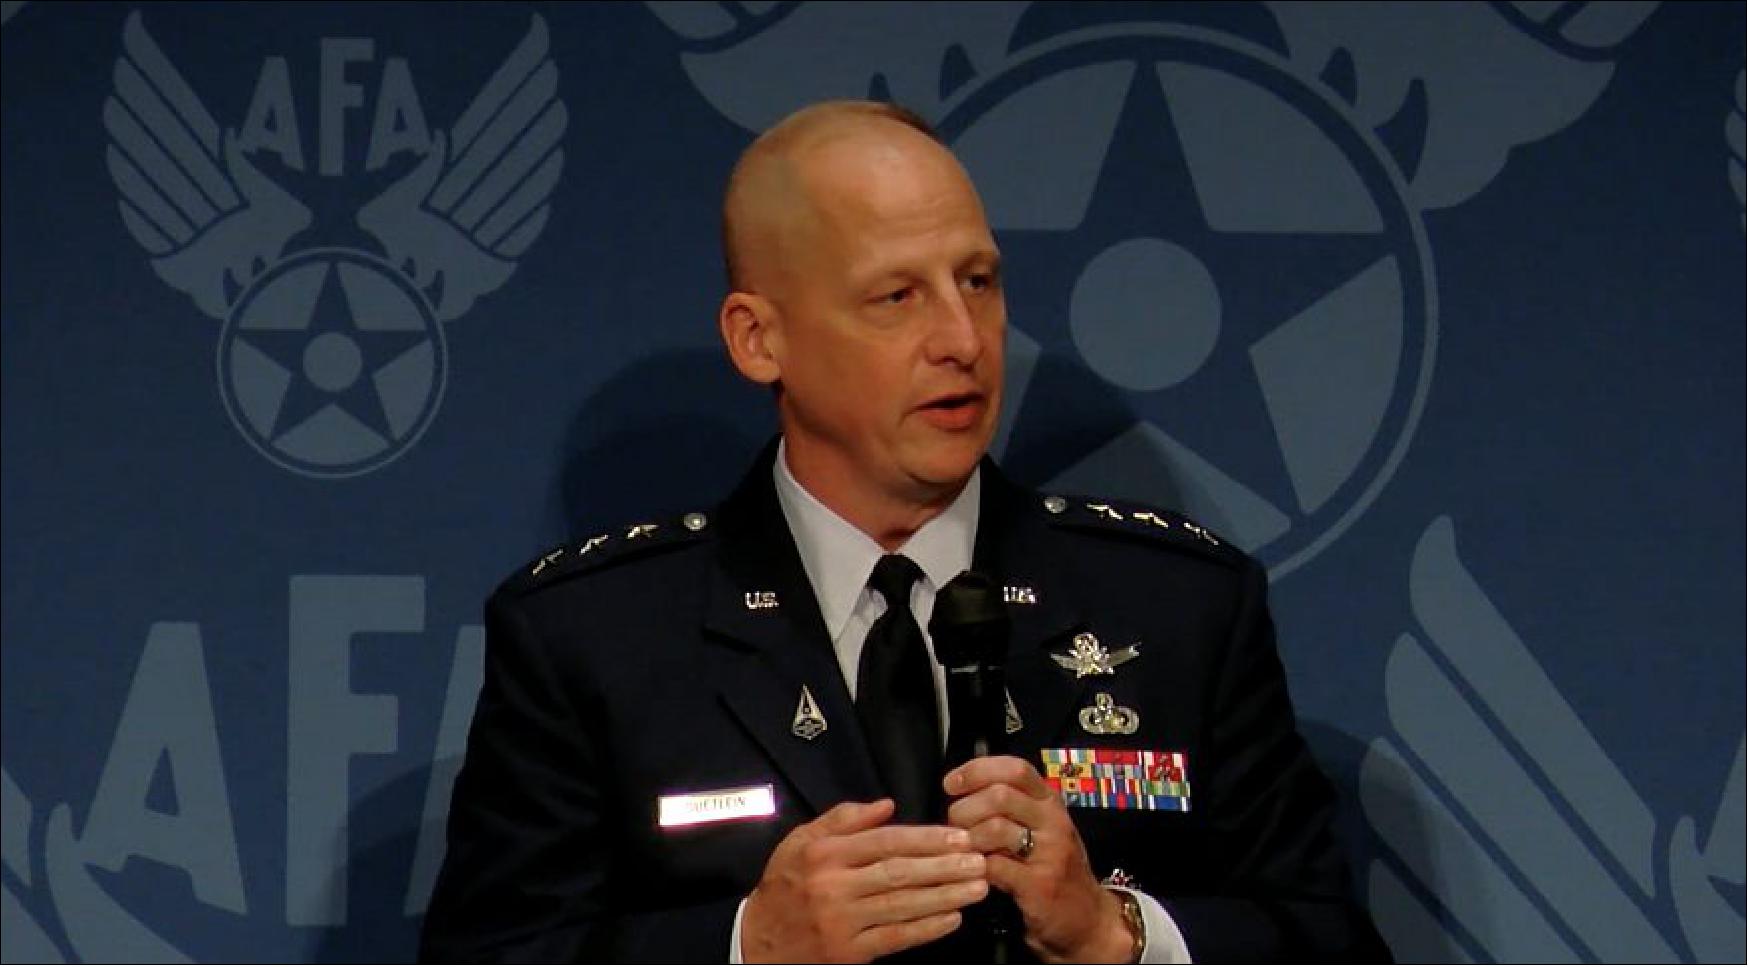 Figure 52: Lt. Gen. Michael Guetlein, commander of the Space Systems Command, speaks Sept. 21, 2021, during a panel discussion at the Air Force Association’s Air Space & Cyber conference (image credit: AFA livestream)